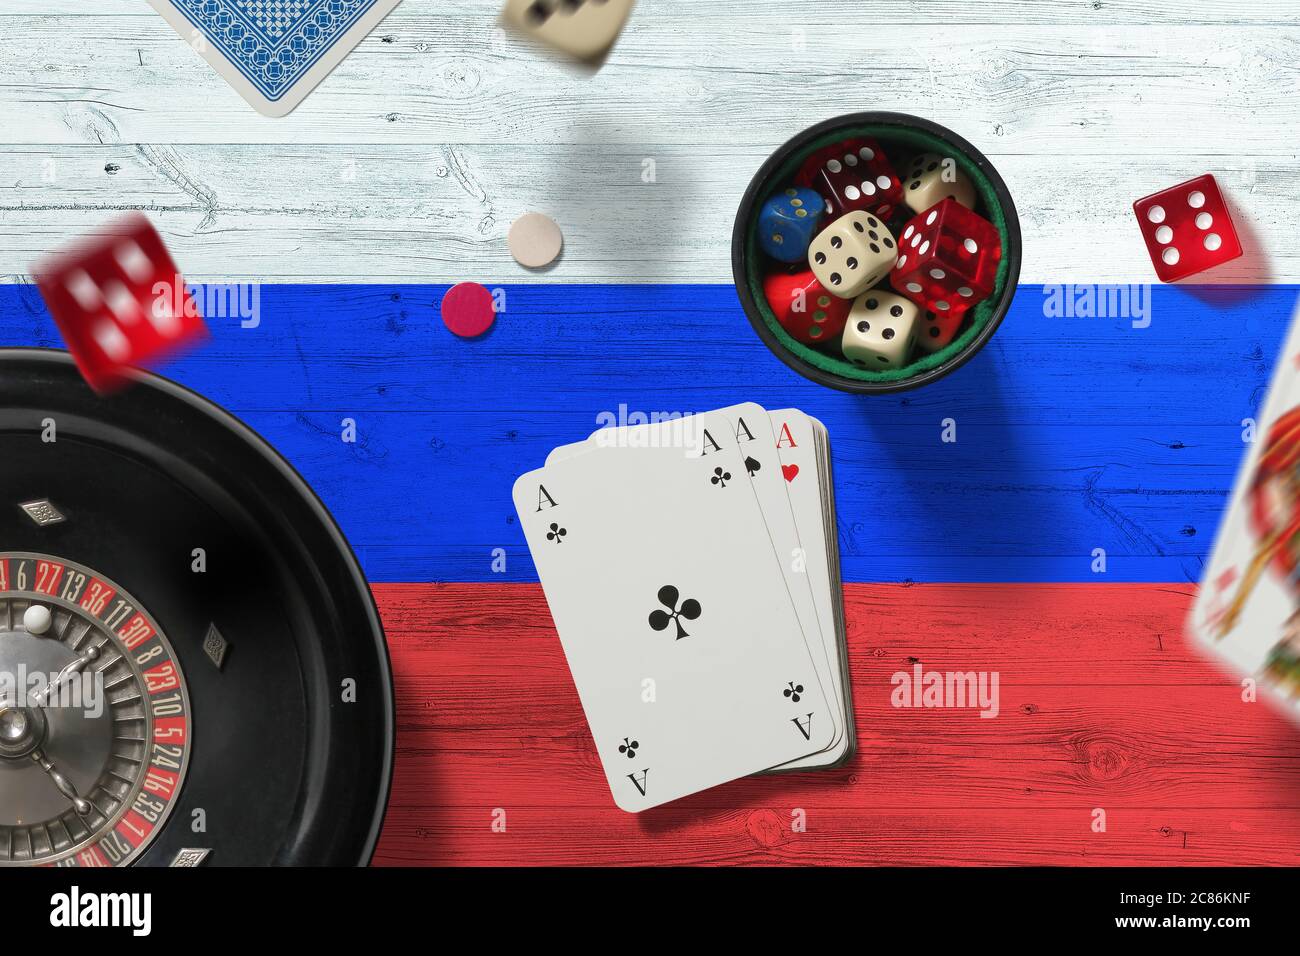 Russia casino theme. Aces in poker game, cards and chips on red table with national flag background. Gambling and betting. Stock Photo